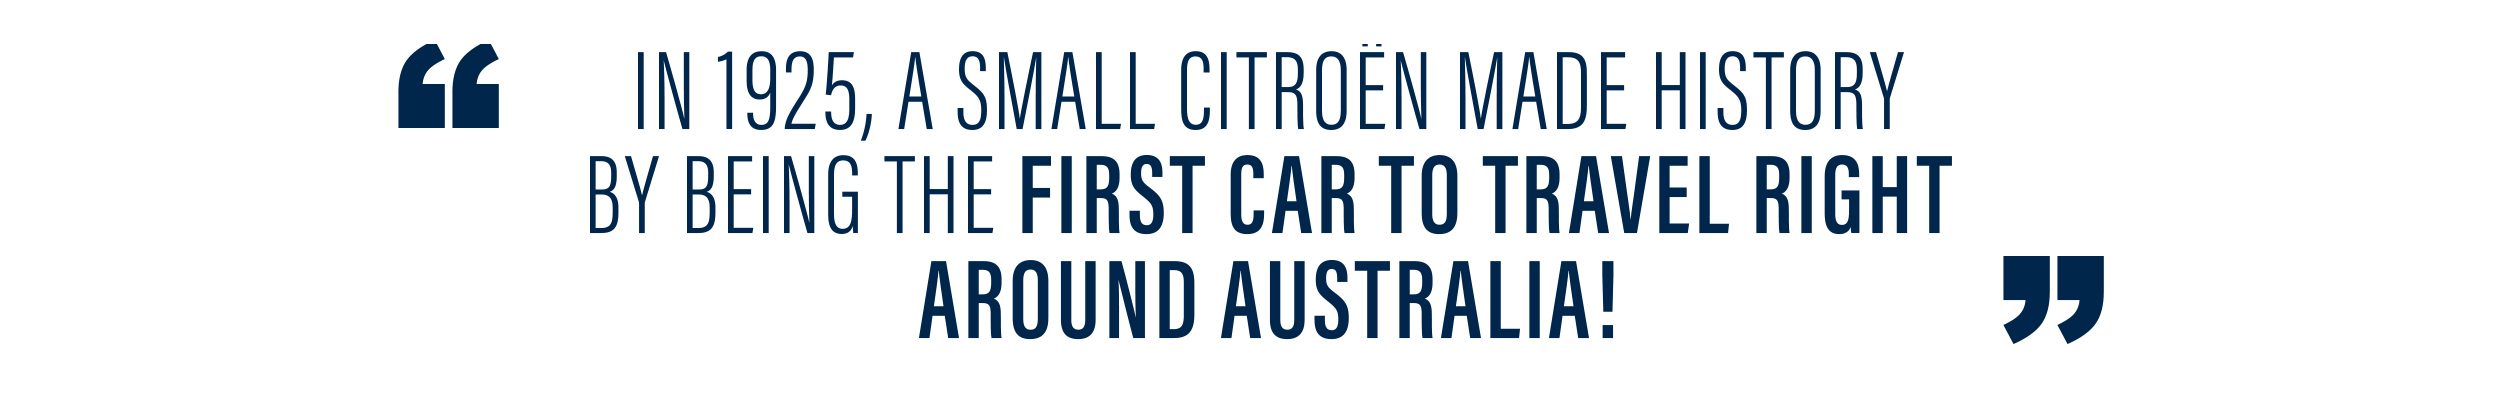 In 1925, a small Citroen made history by being the first car to travel Right Around Australia!